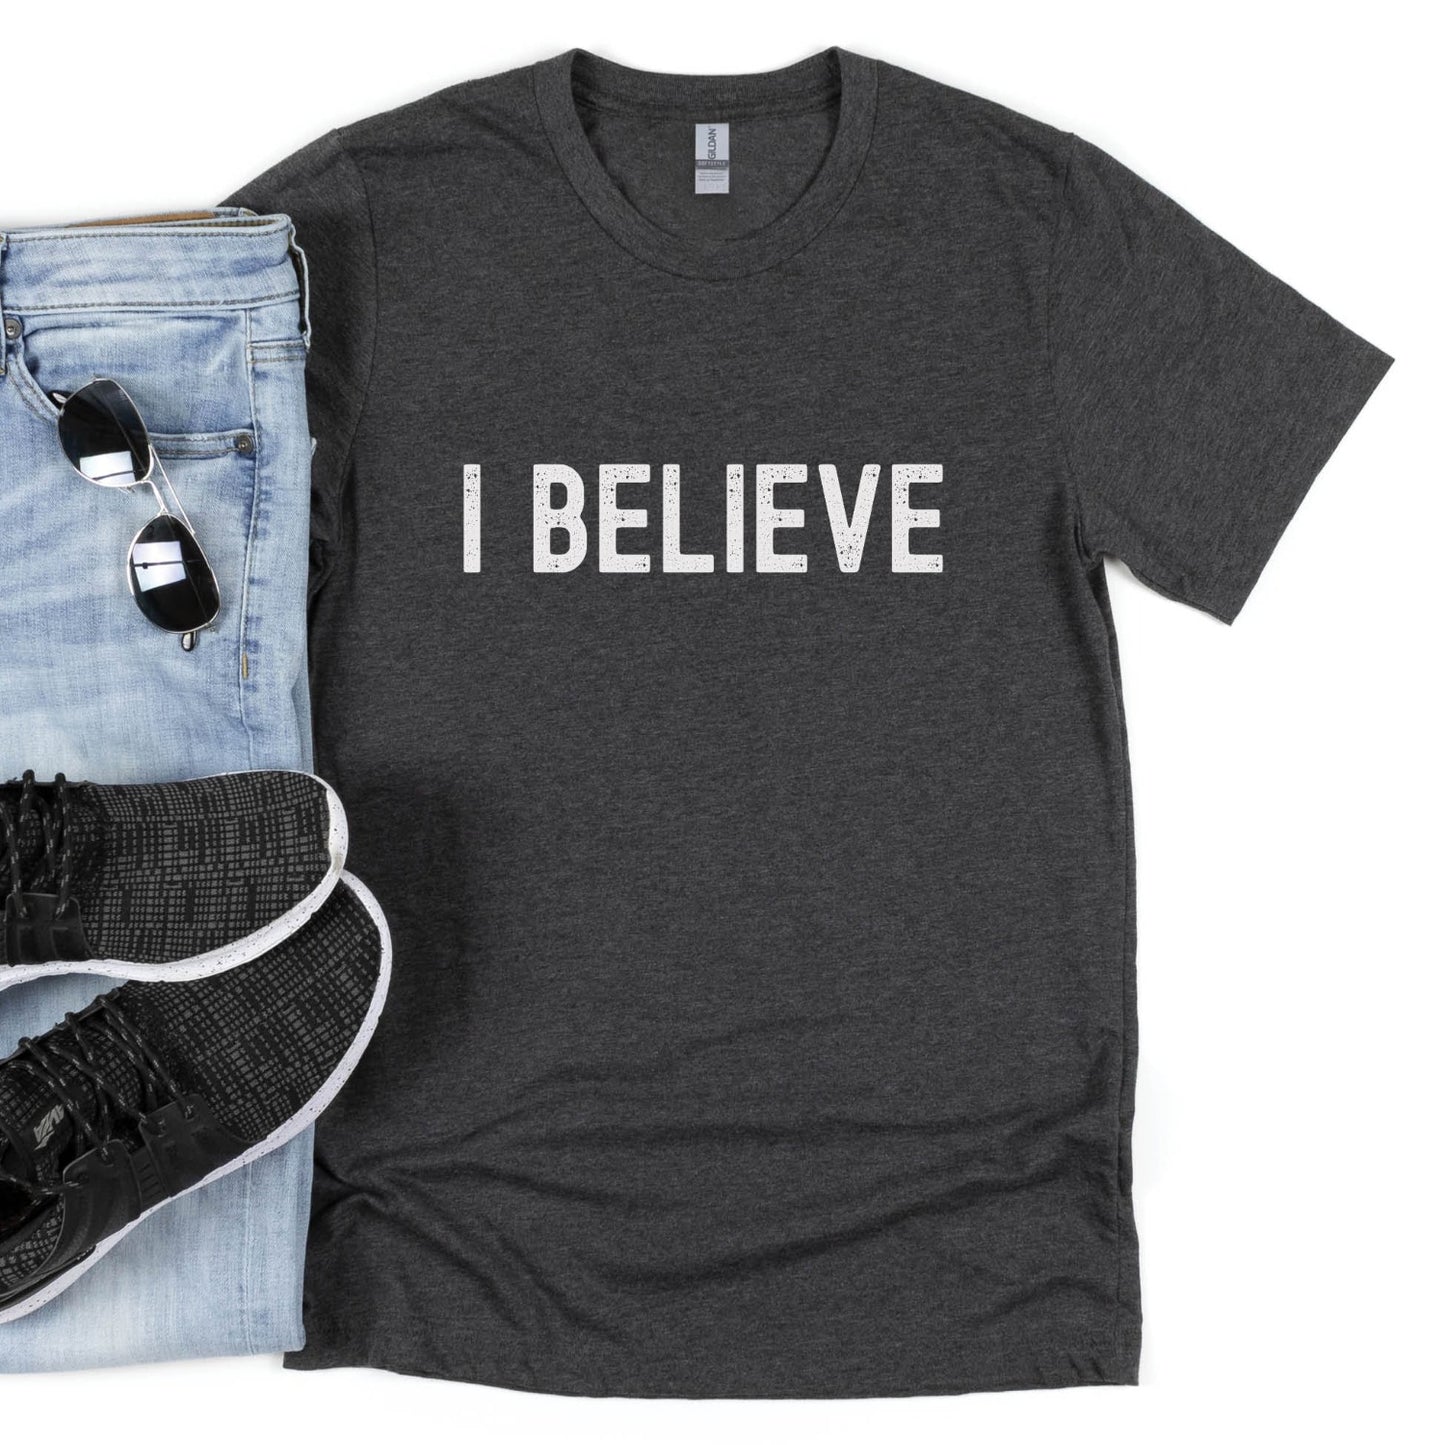 I BELIEVE Christian aesthetic faith-based bold statement distressed typography t-shirt design printed in white on soft heather dark gray unisex fit t-shirt, designed for men & women believers